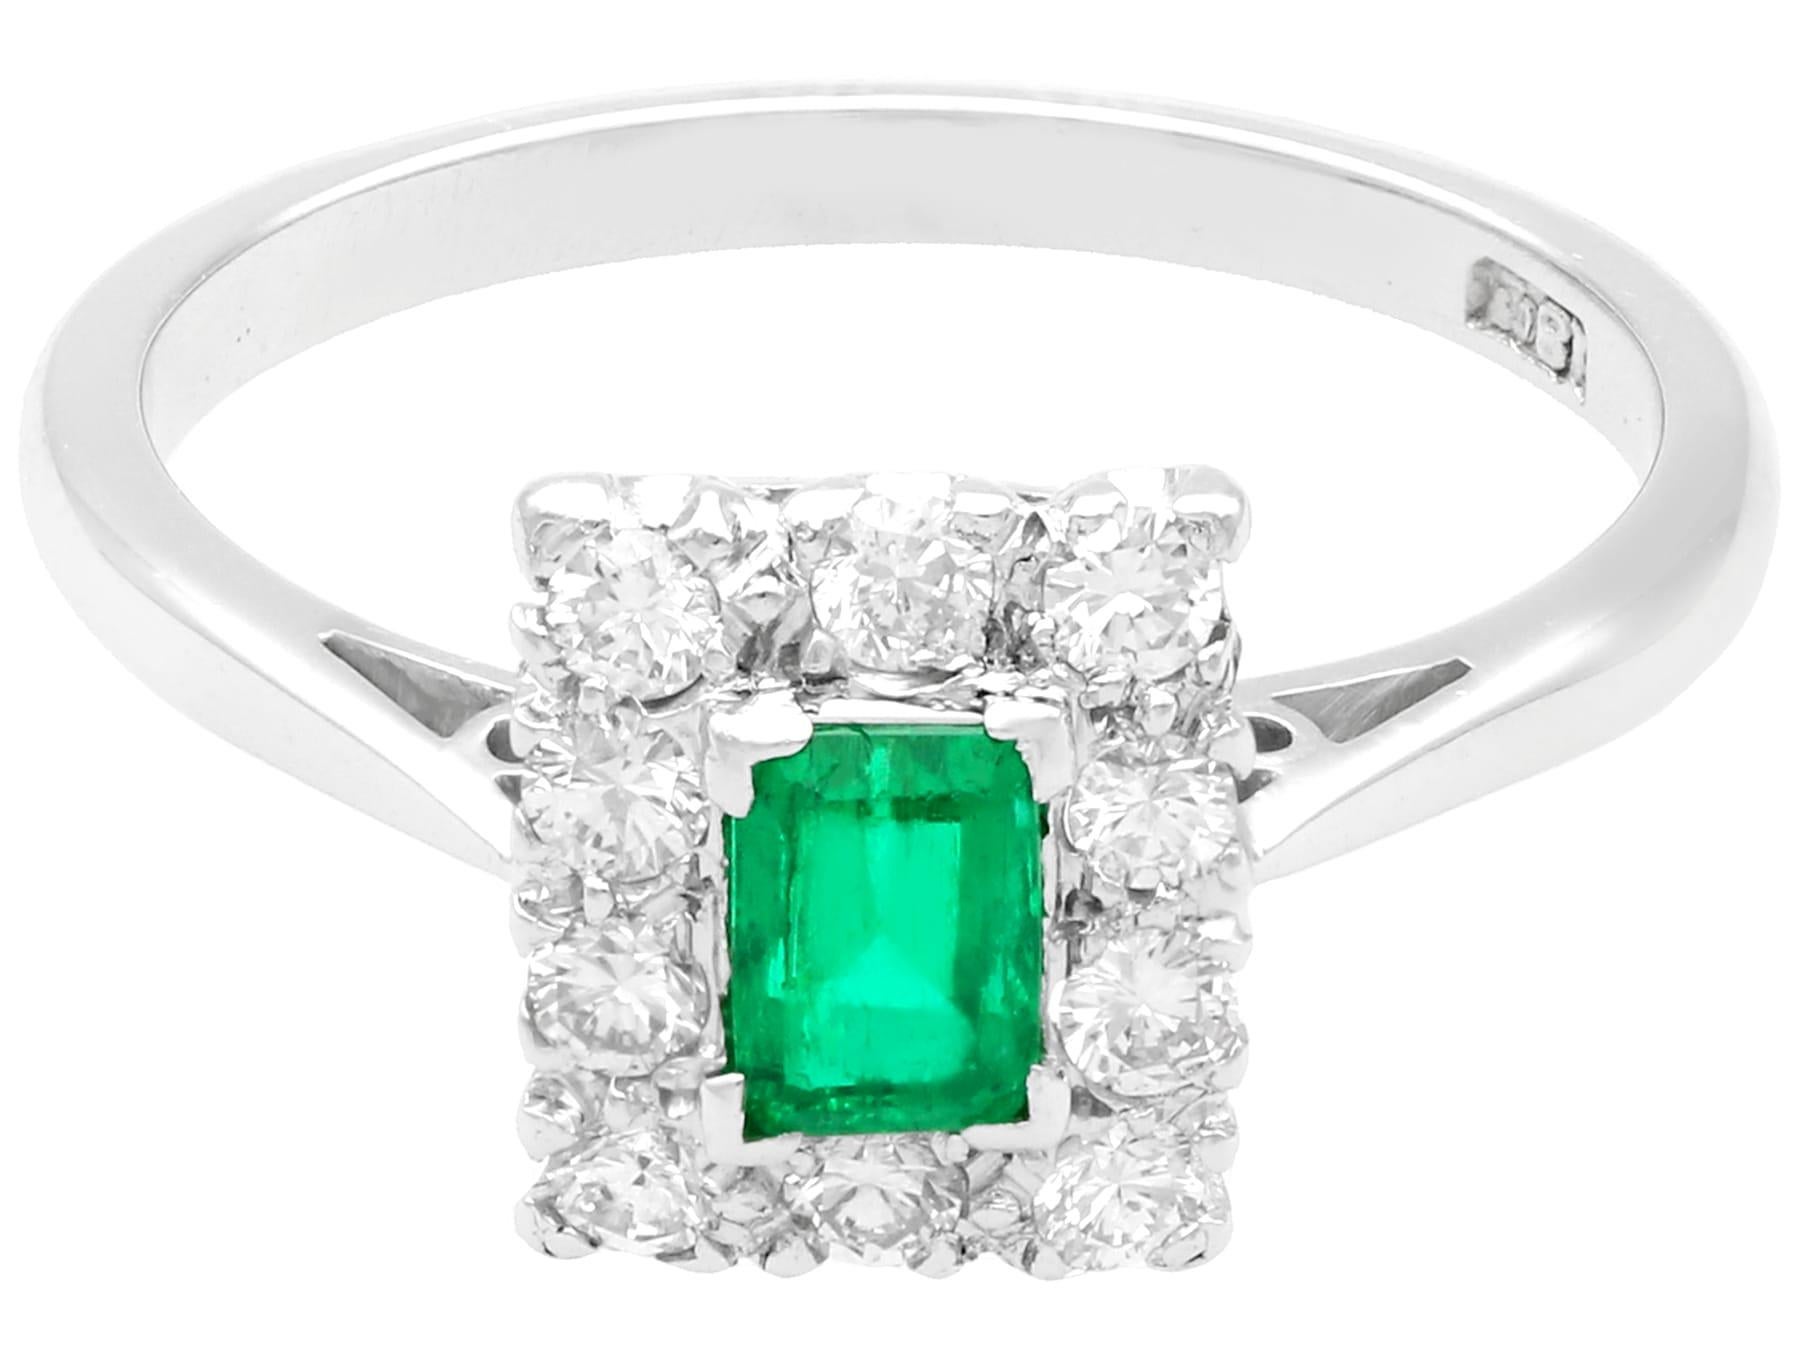 1940s Emerald Diamond White Gold Cocktail Ring In Excellent Condition For Sale In Jesmond, Newcastle Upon Tyne